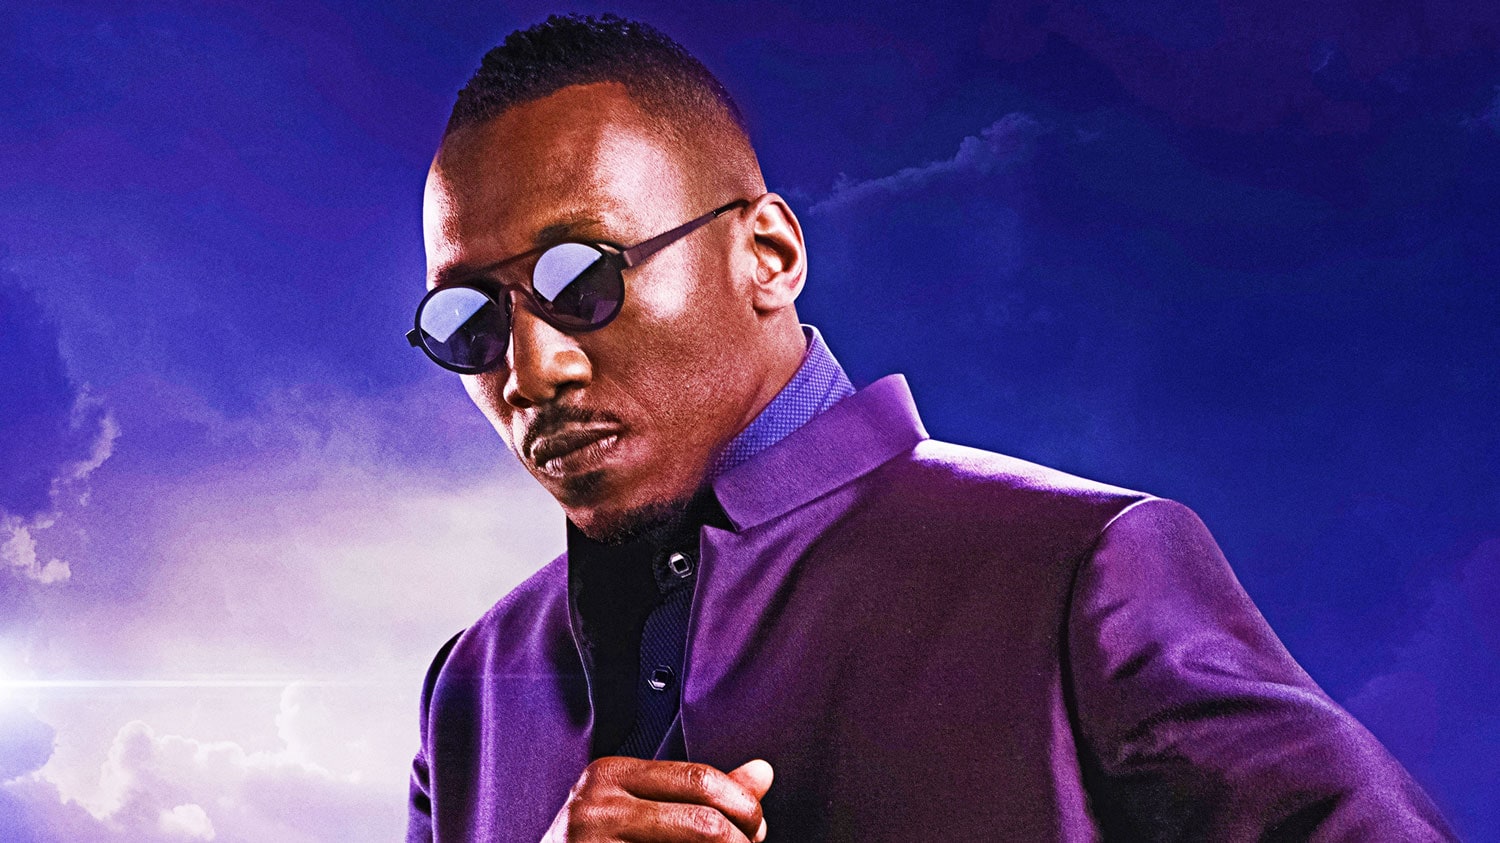 Marvel's-Blade-Movie-Gets-A-New-Release-Date